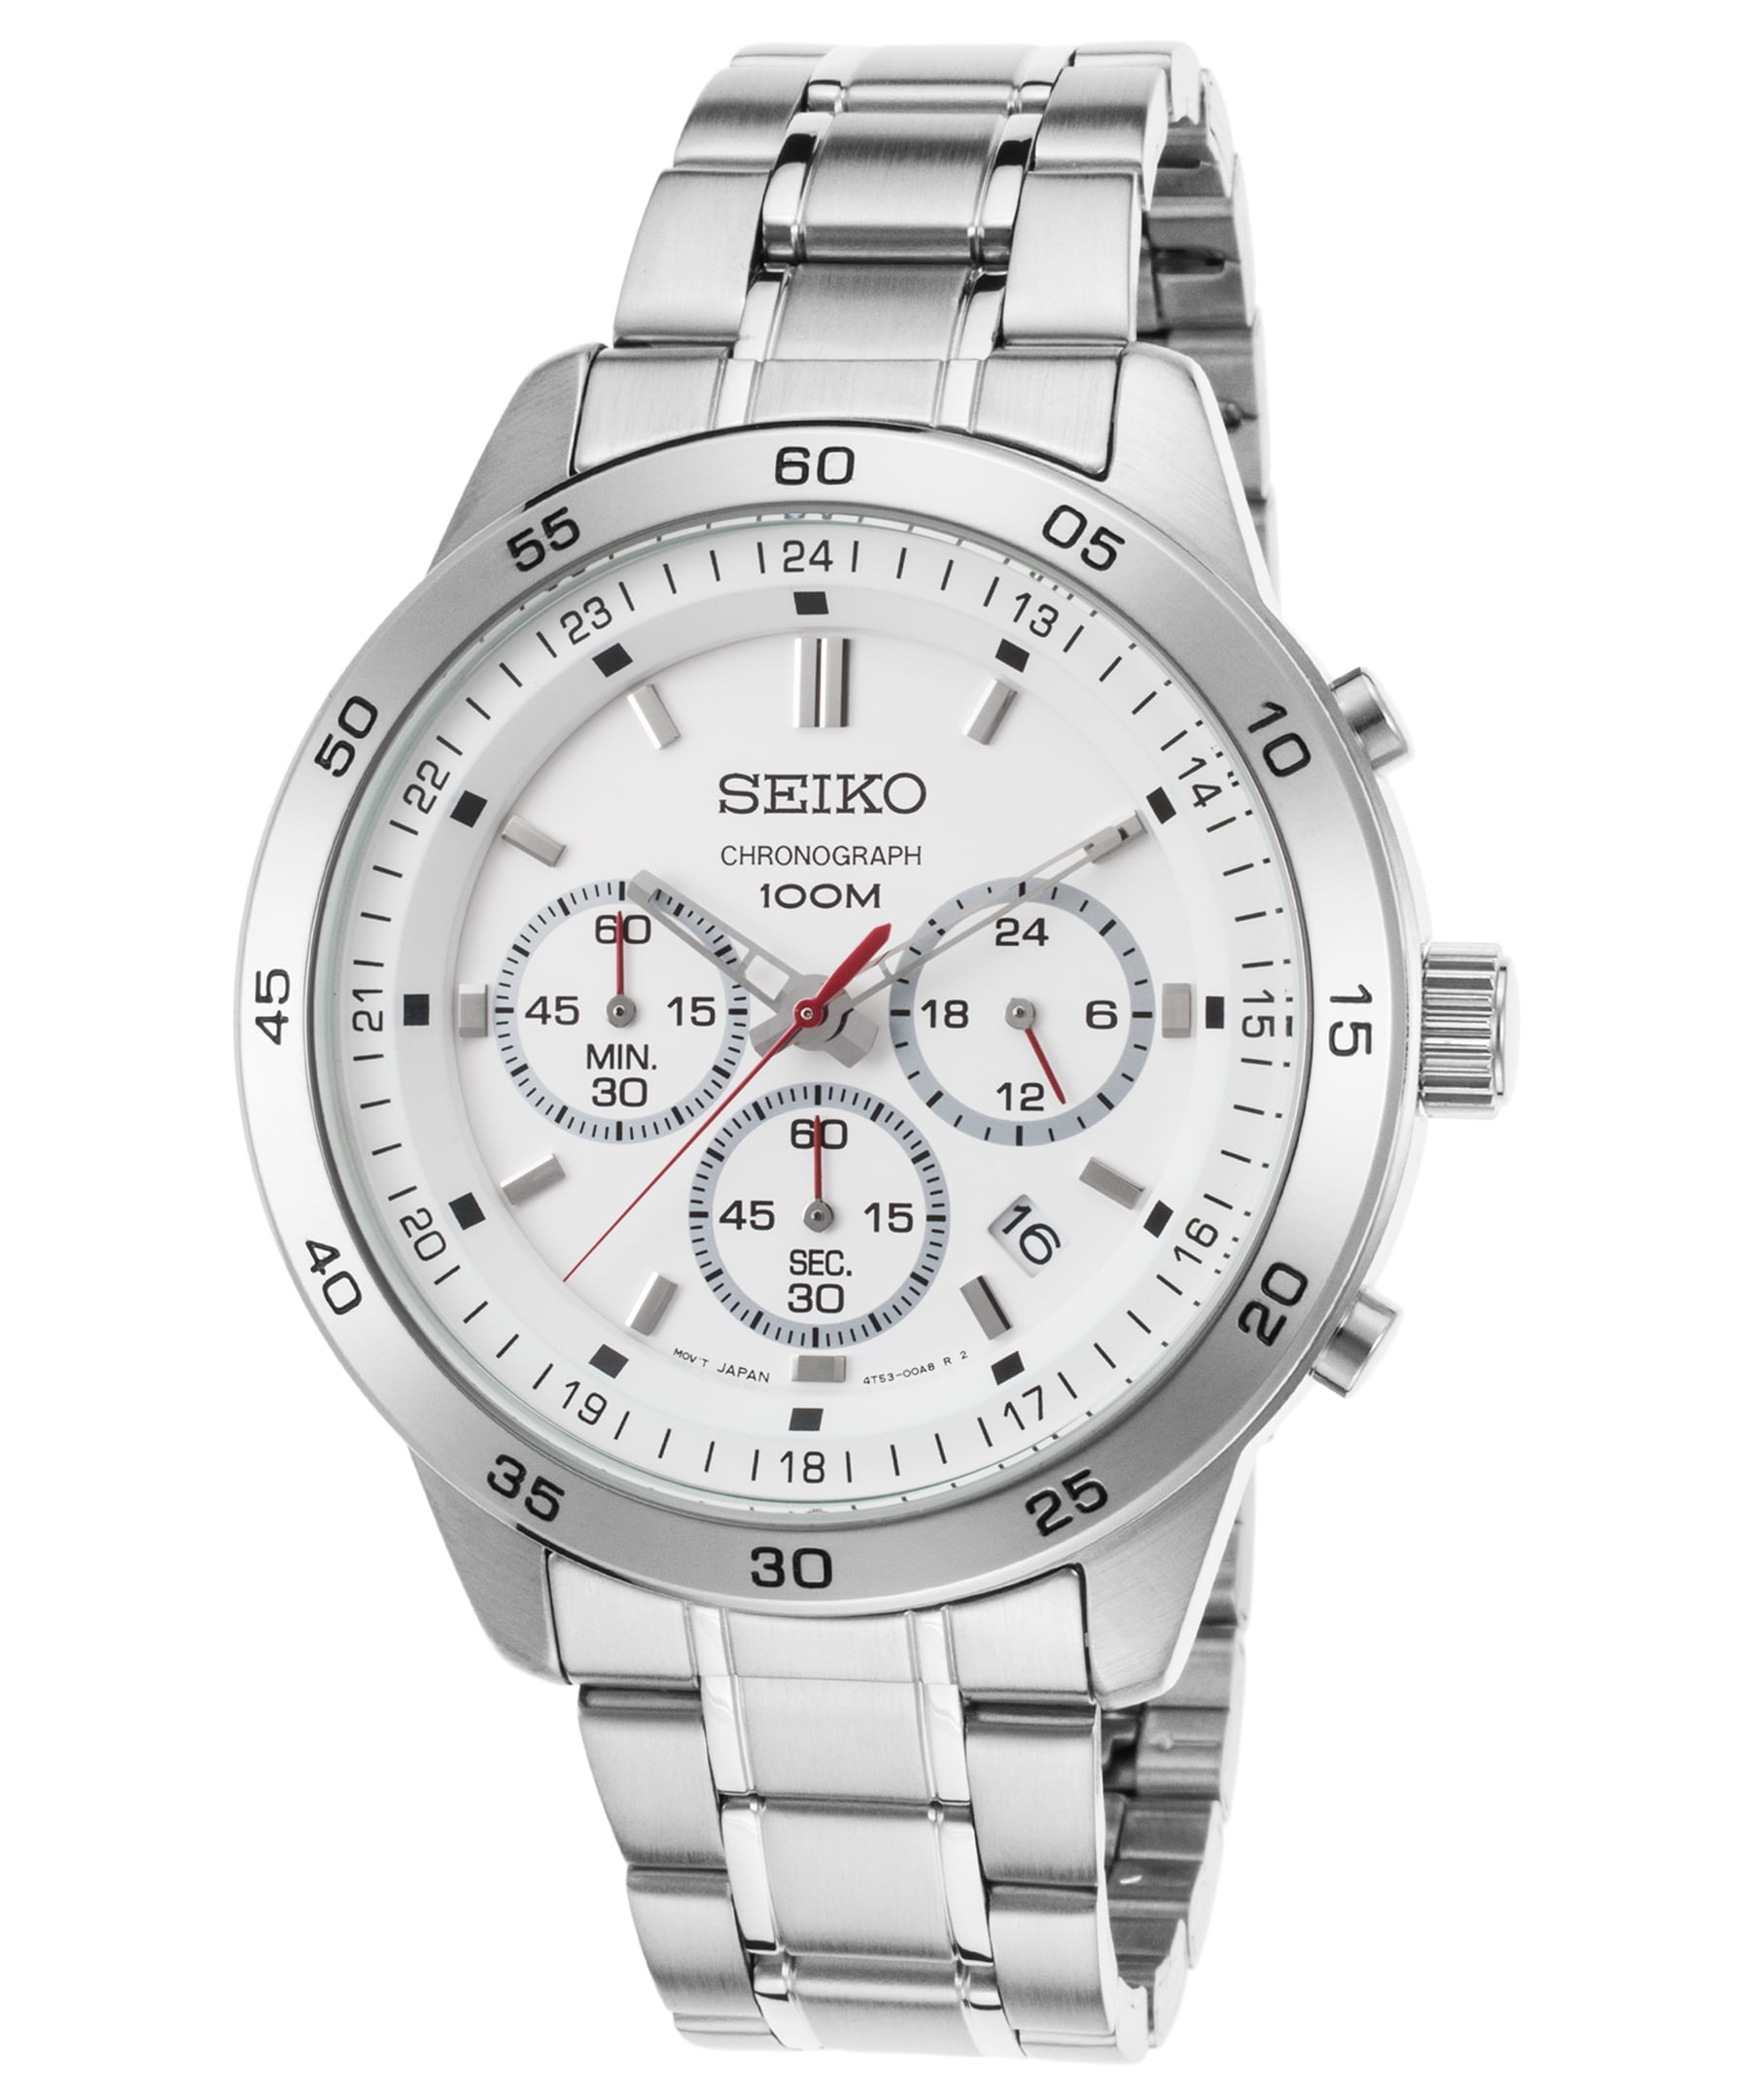 Seiko Men's Sks515p1 Neo Sport Chronograph Stainless Steel White Dial Stainless Steel Watch -